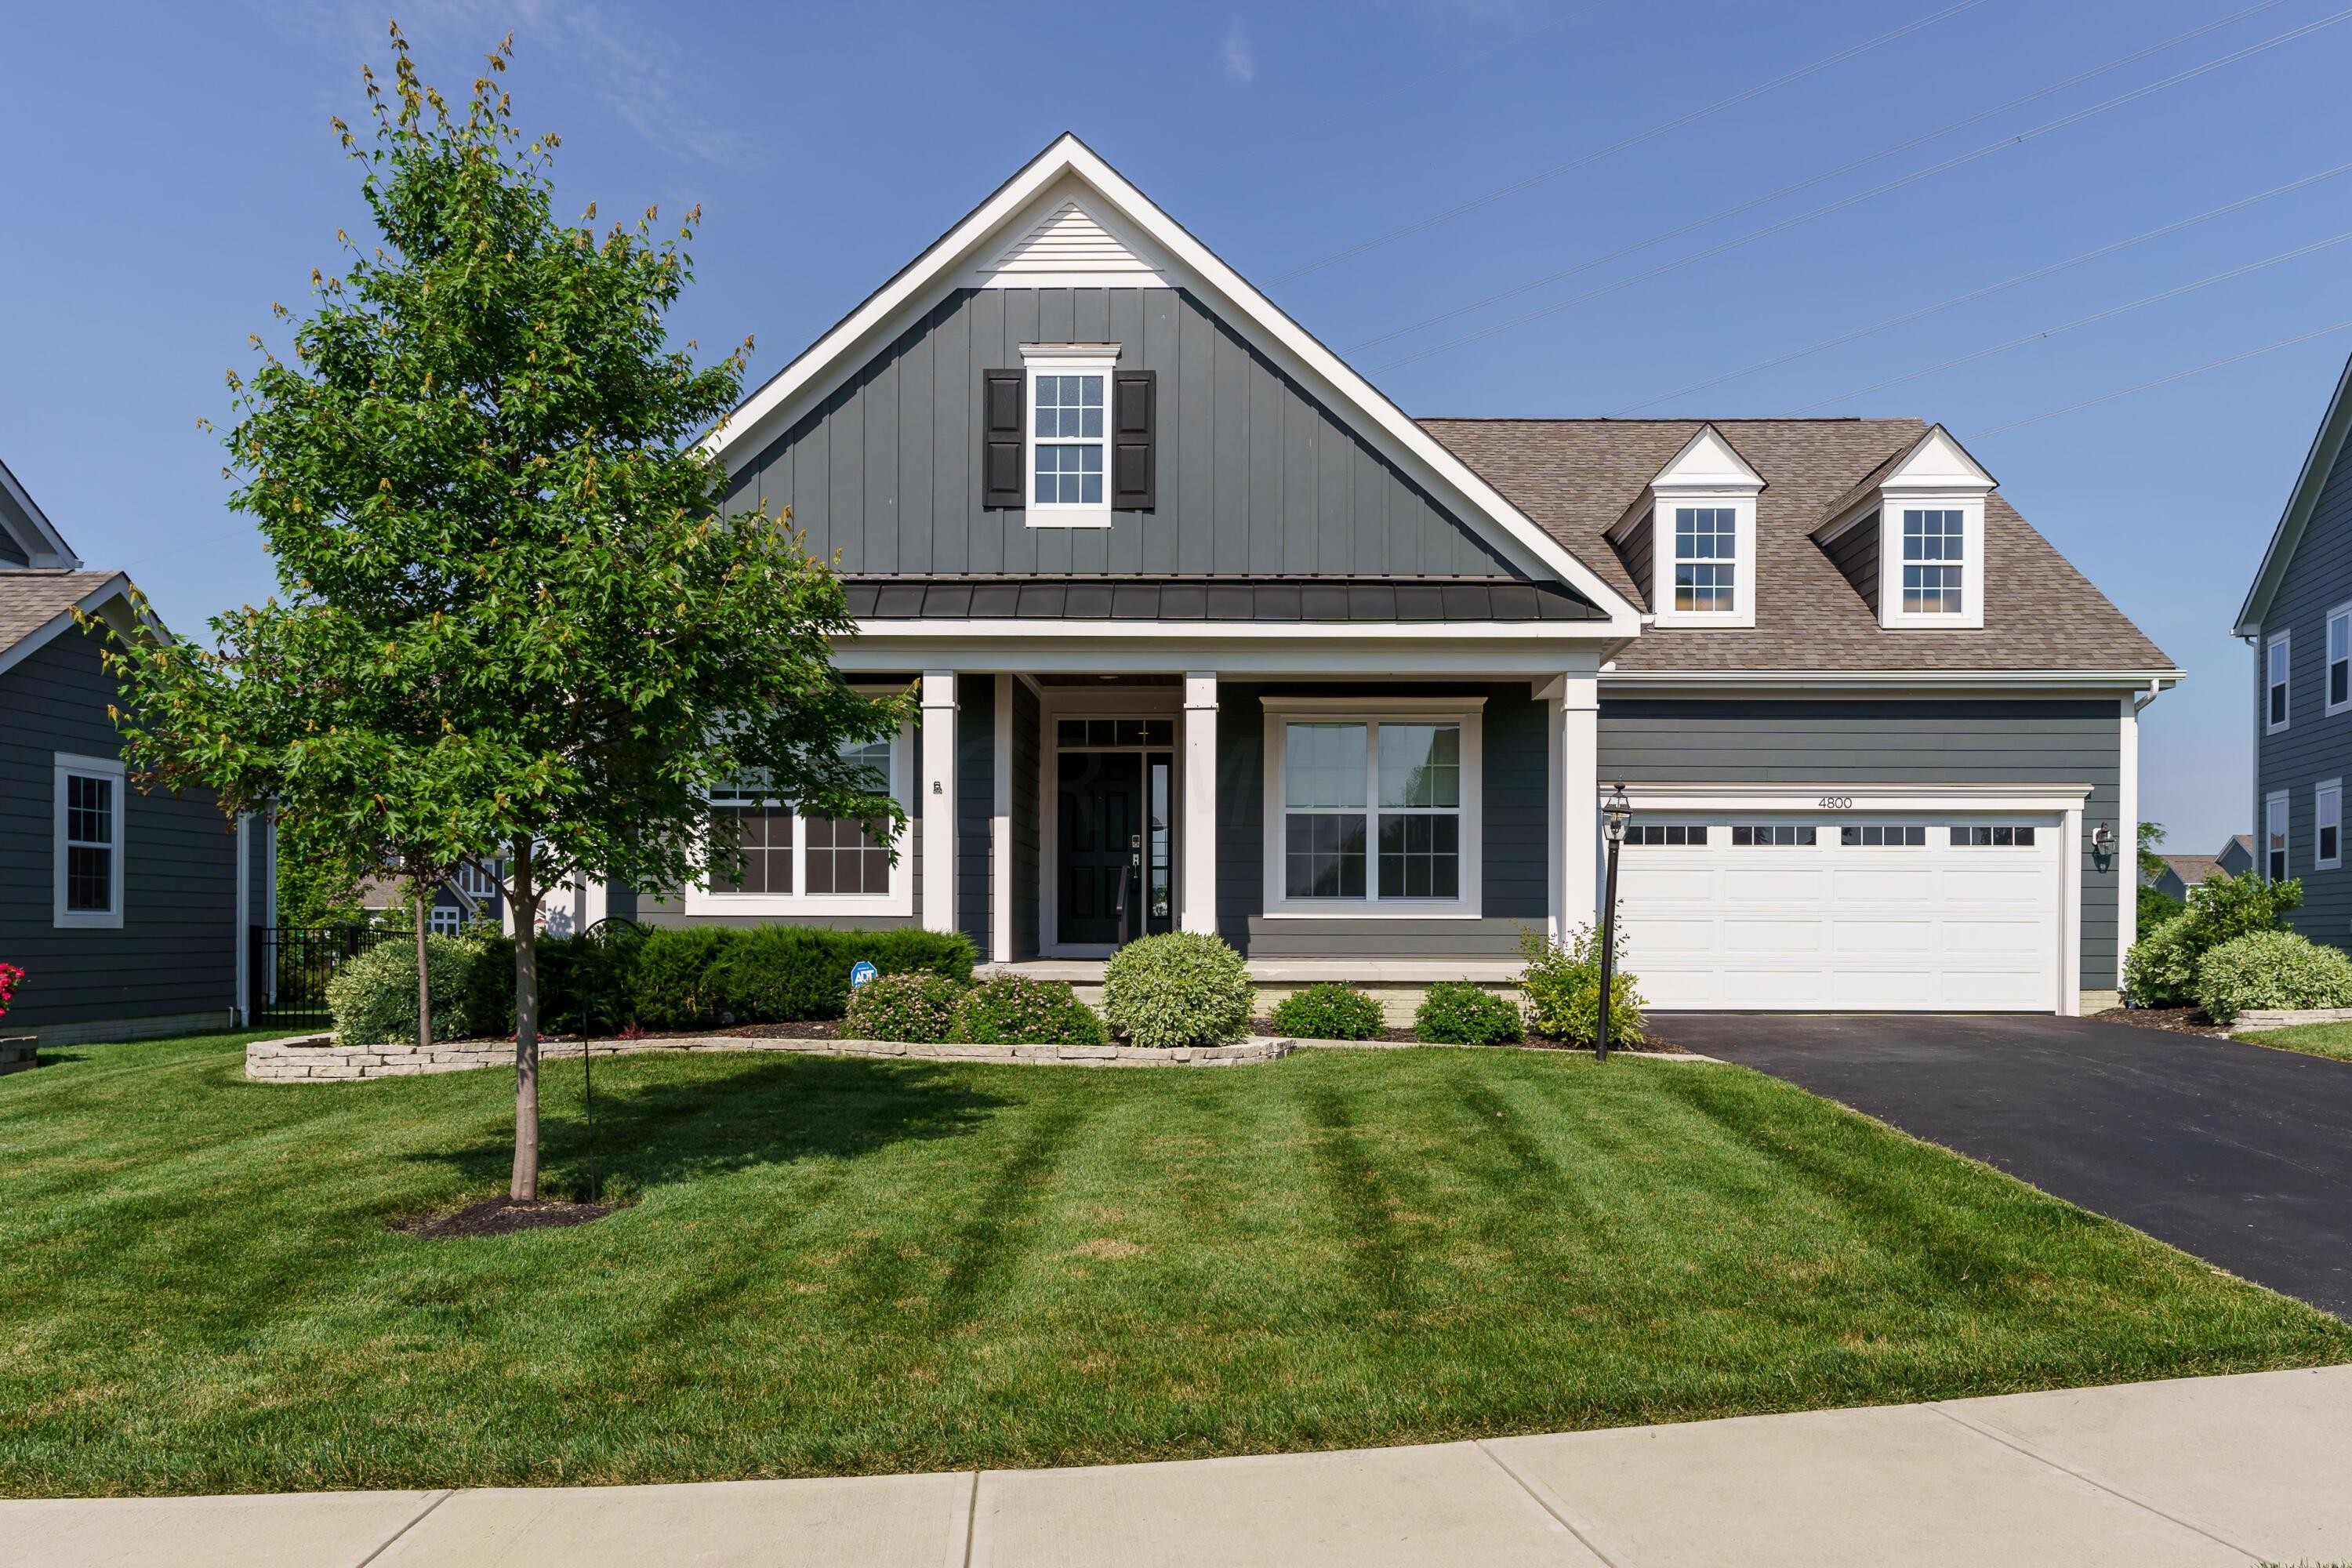 1. 4800 Hunters Bend Court